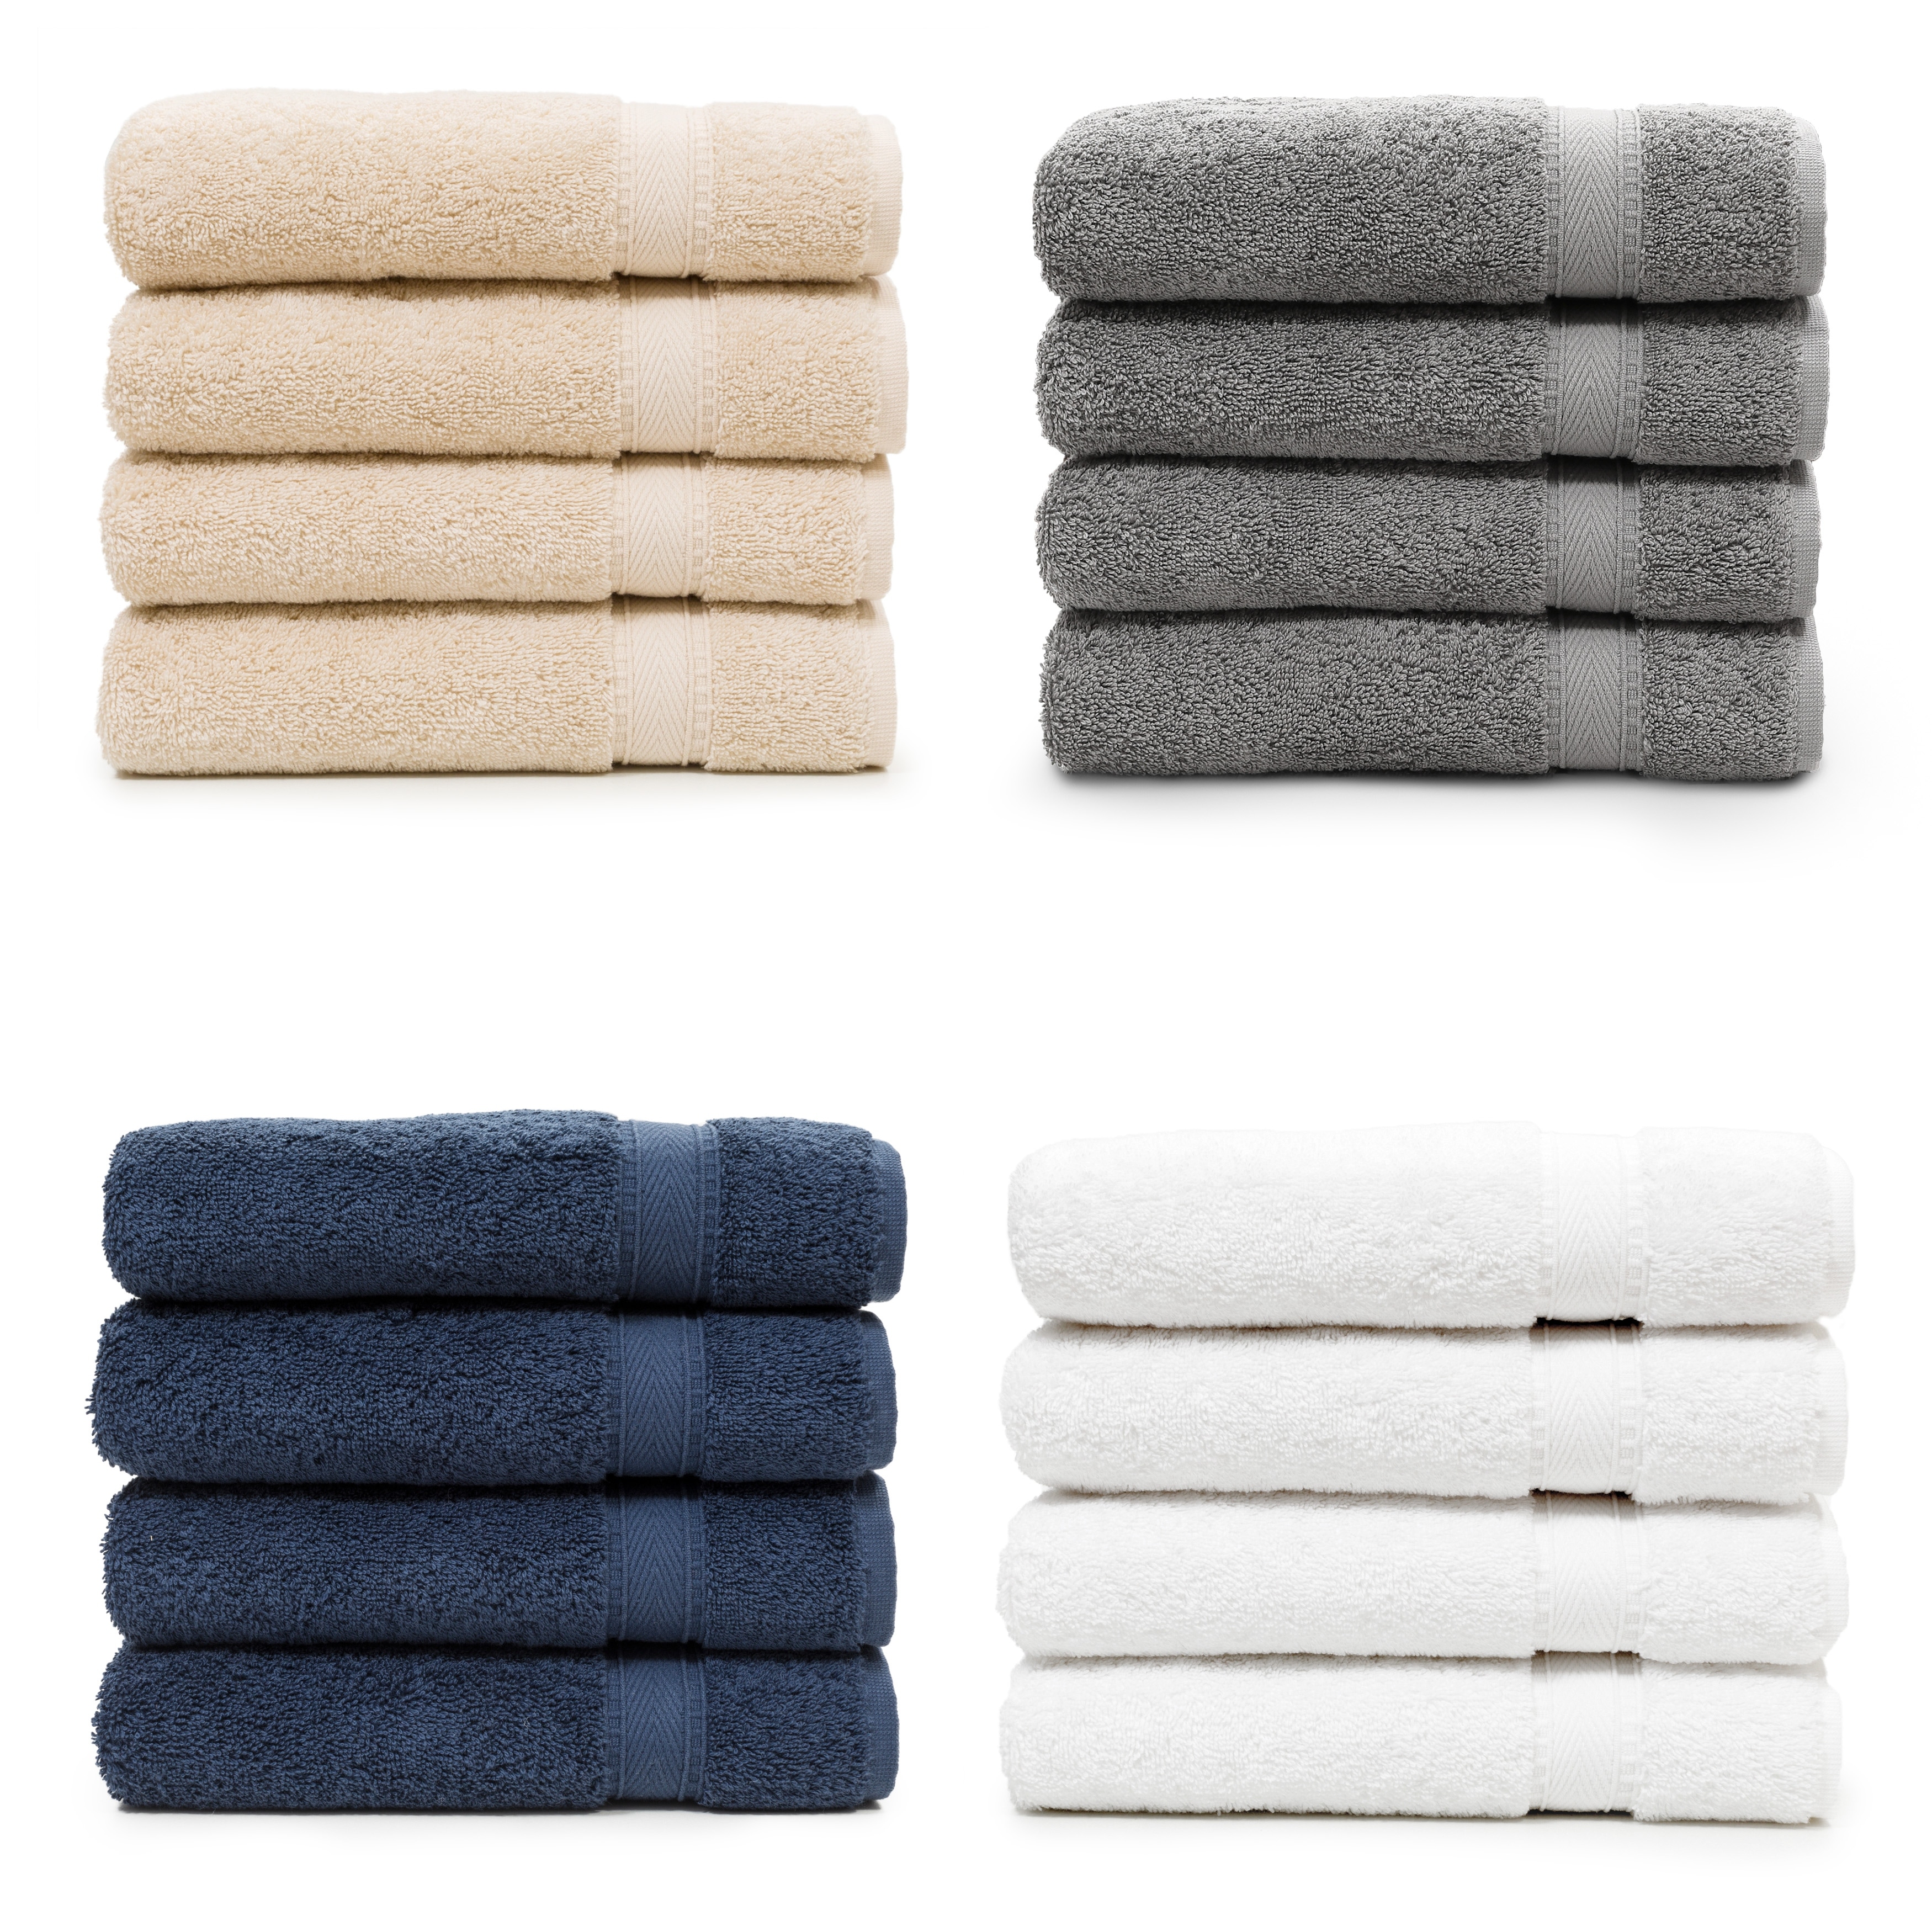 https://ak1.ostkcdn.com/images/products/is/images/direct/b44ff4418efdfd102fc6883e429bc852be47bf88/Authentic-Hotel-Spa-Turkish-Cotton-Hand-Towels-%28Set-of-4%29.jpg